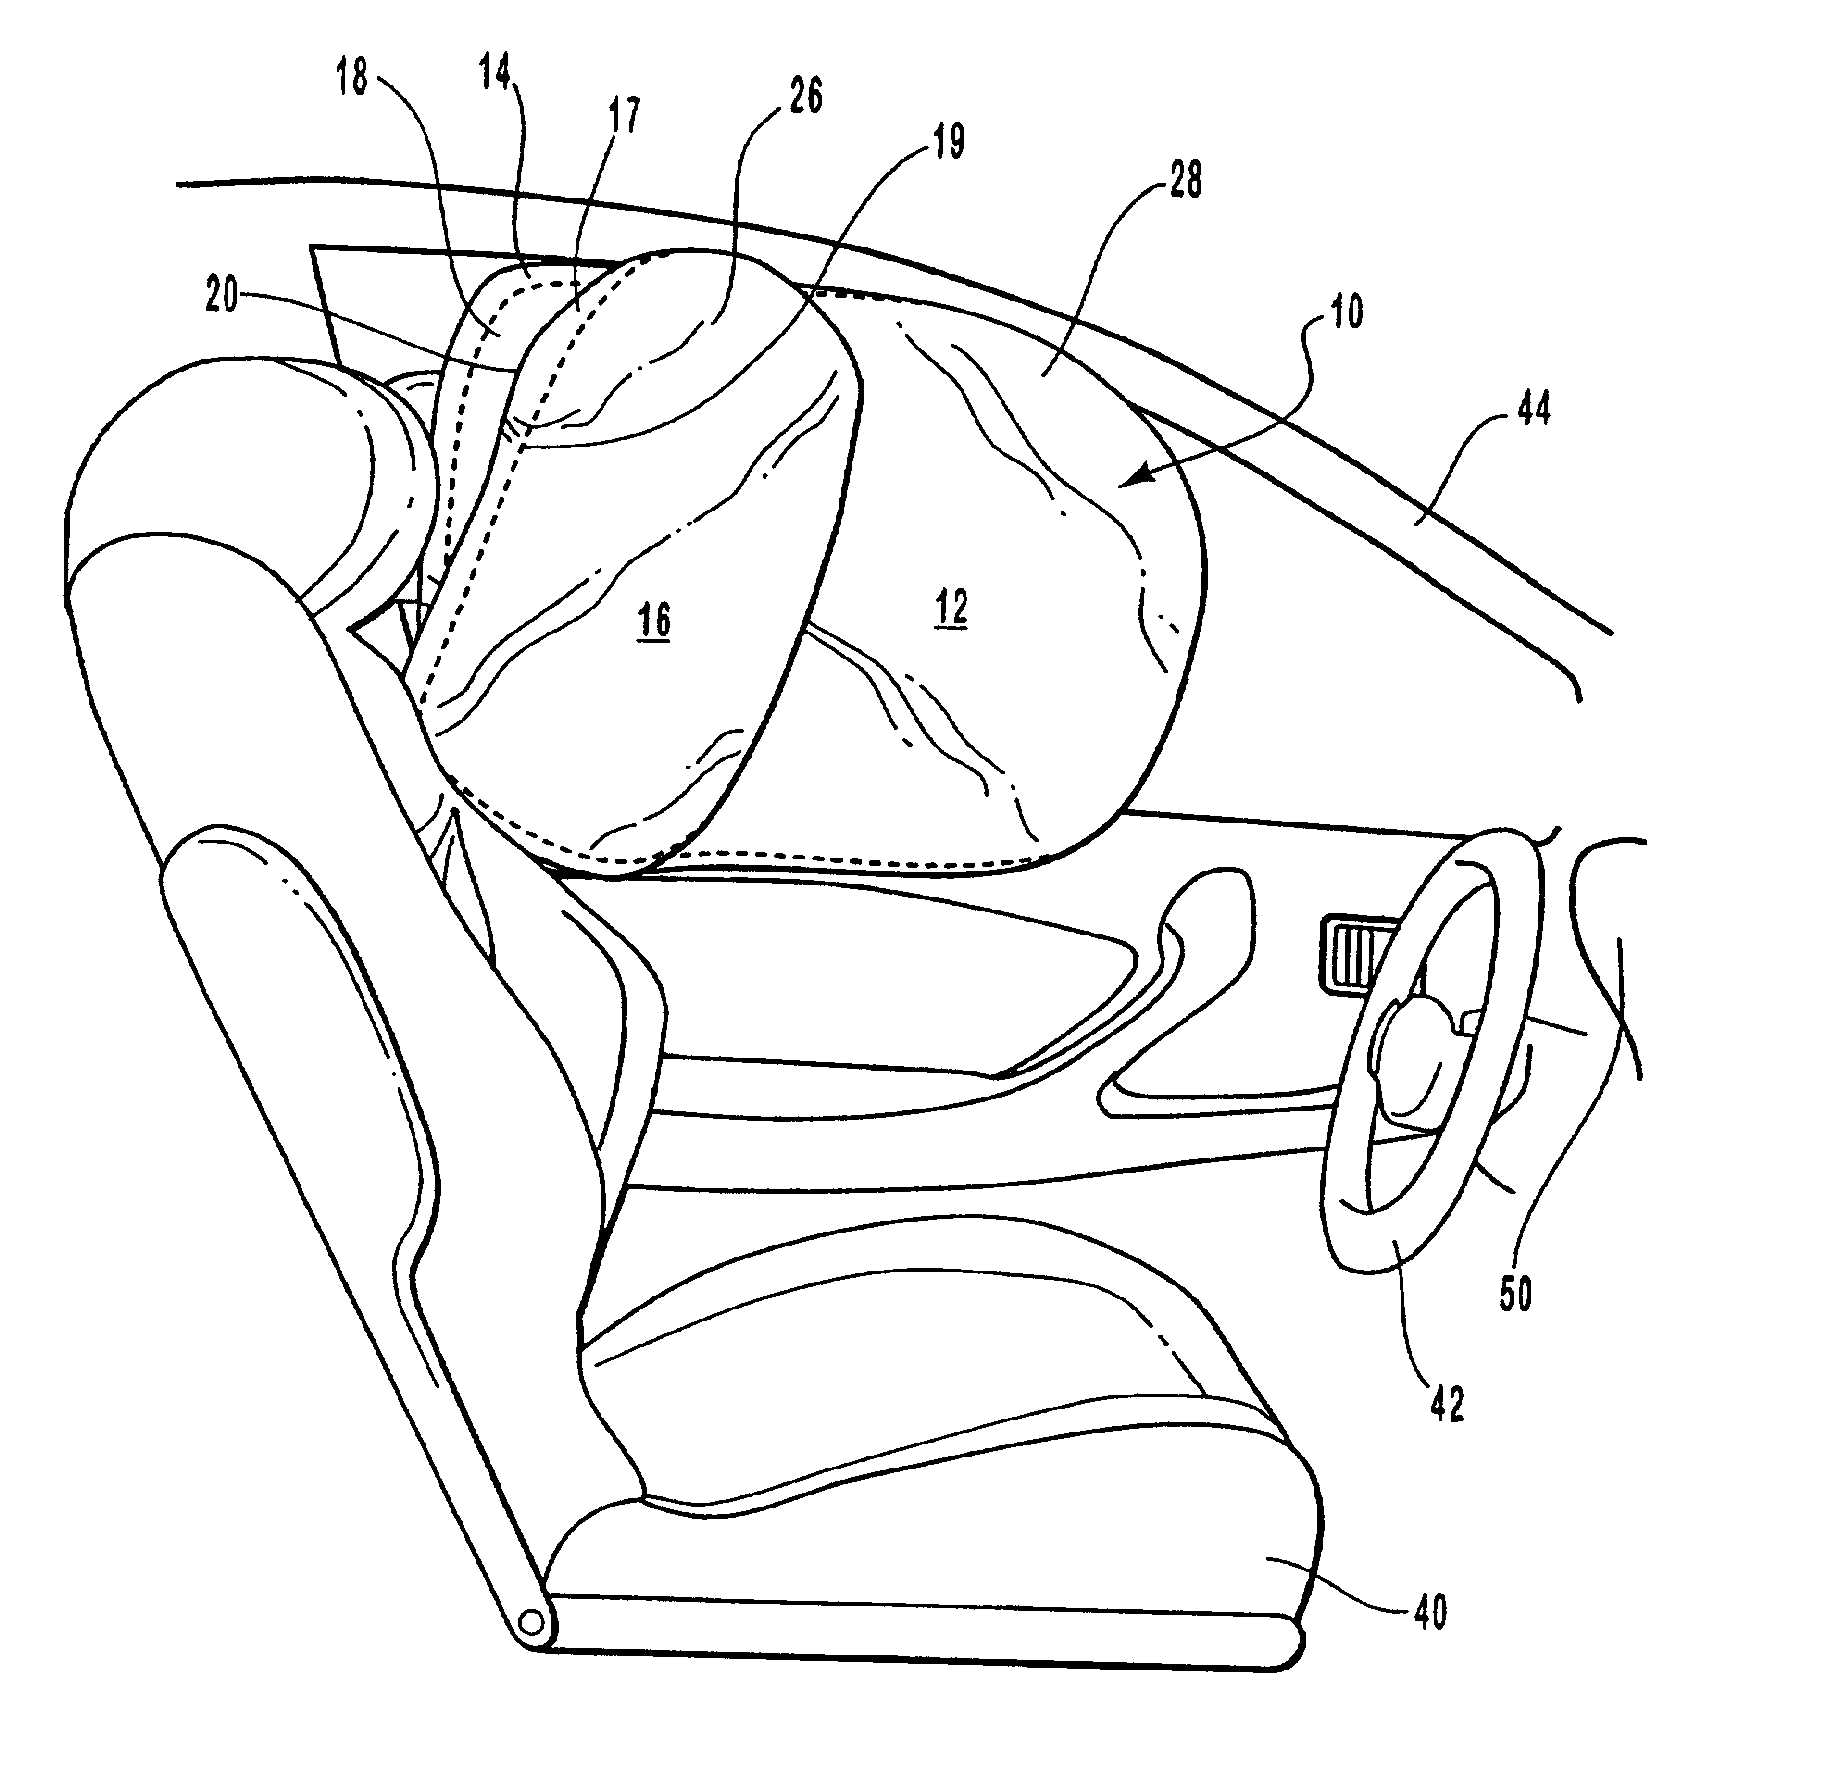 Side-impact, variable thickness vehicular airbag